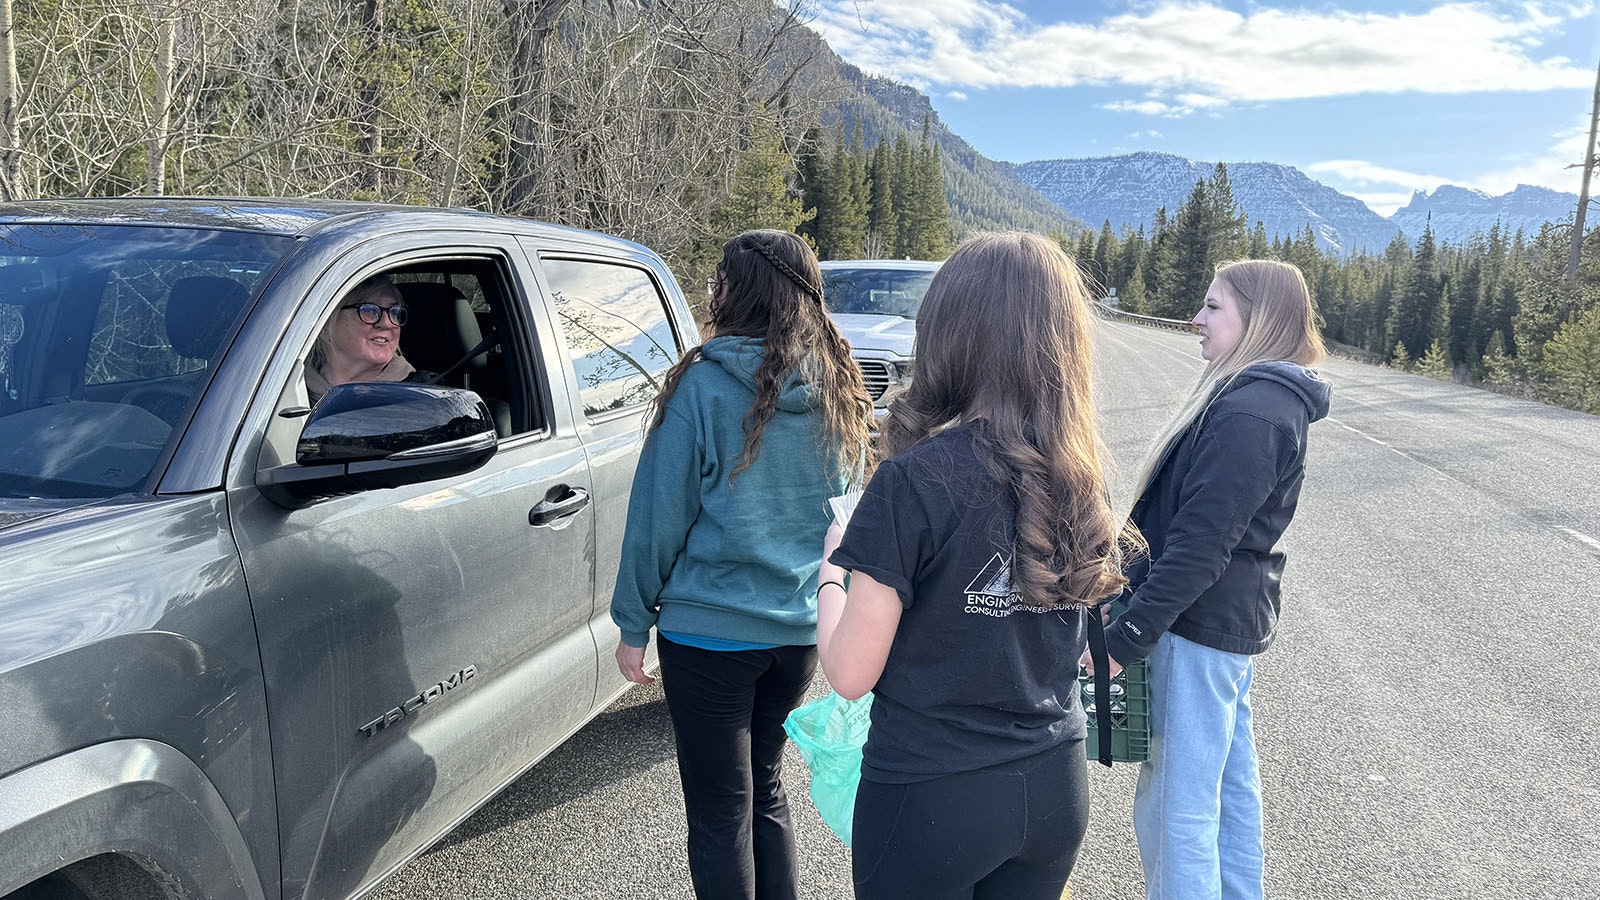 Stacy, Hailey, and Grace giving homemade carrot cake to the other people in line for the opening of the East Entrance of Yellowstone on Friday morning.